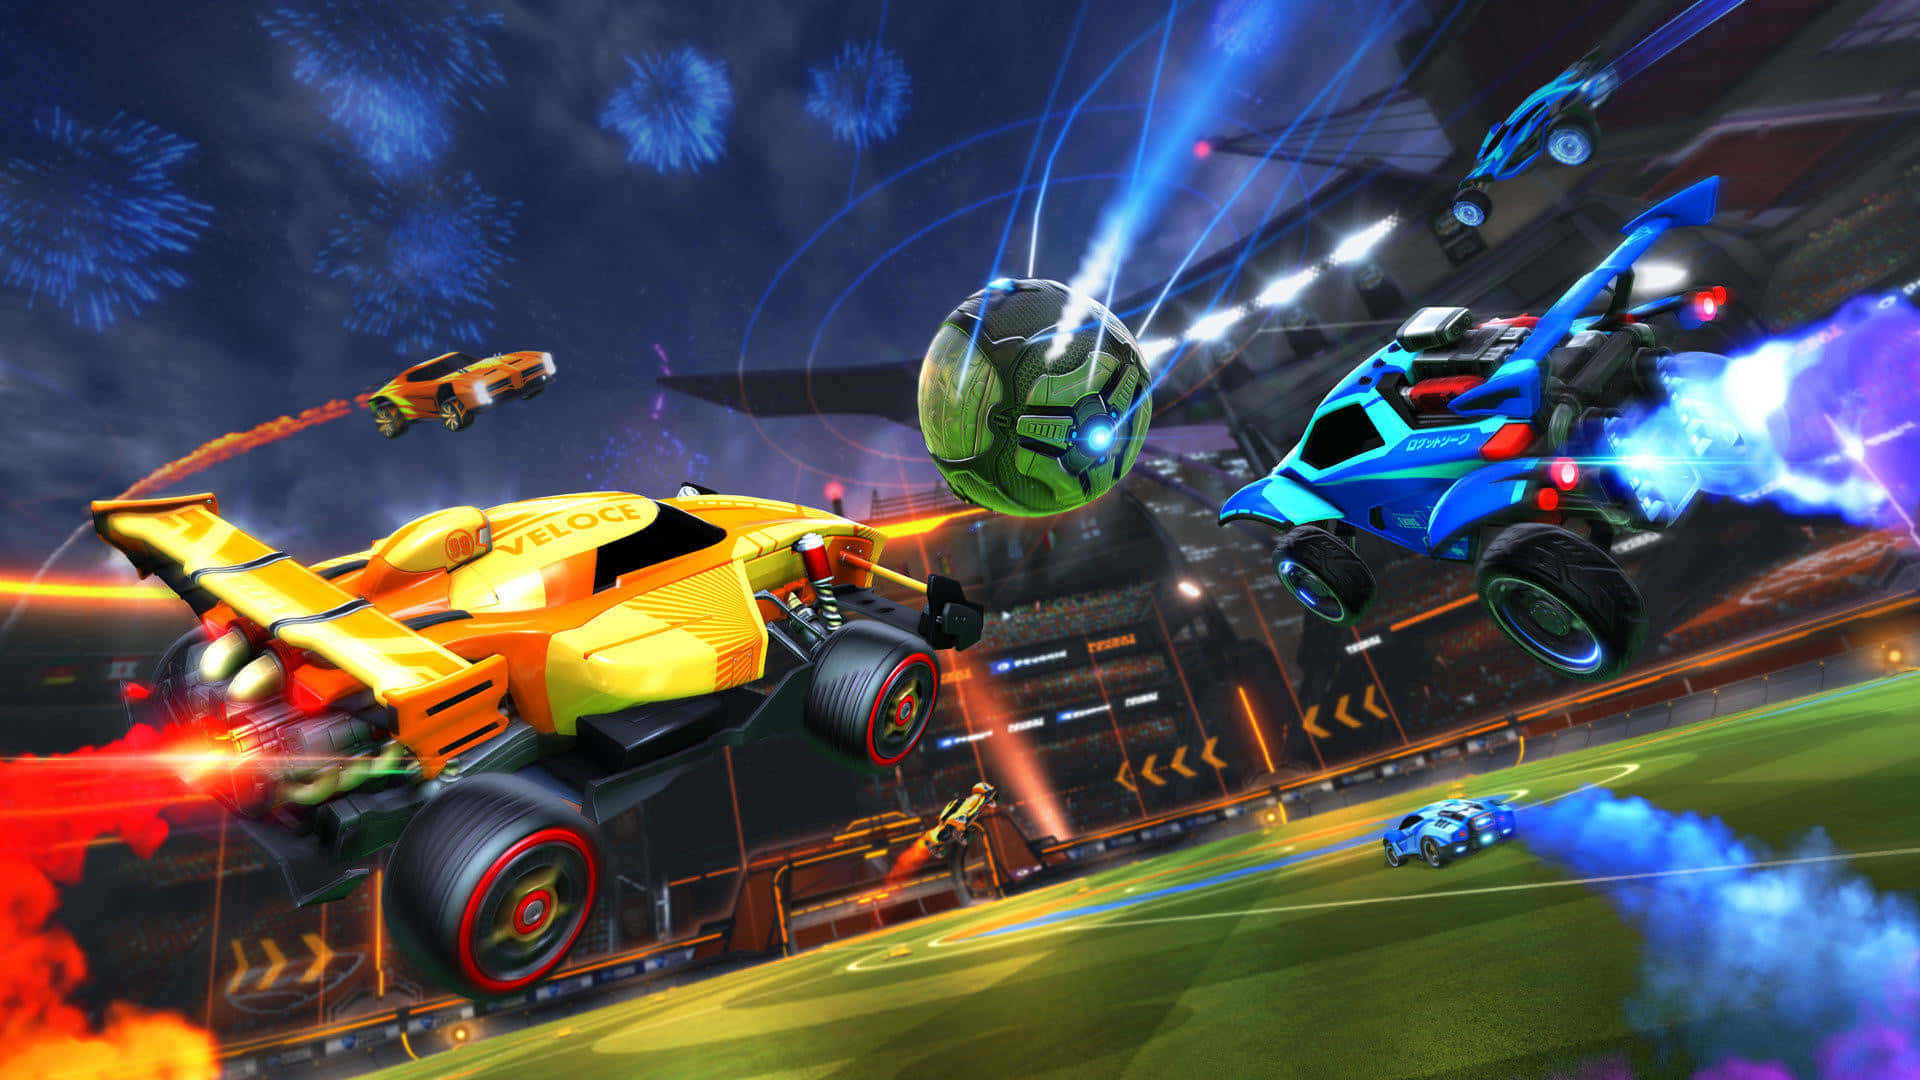 Competitive players challenge each other in intense Rocket League matches.